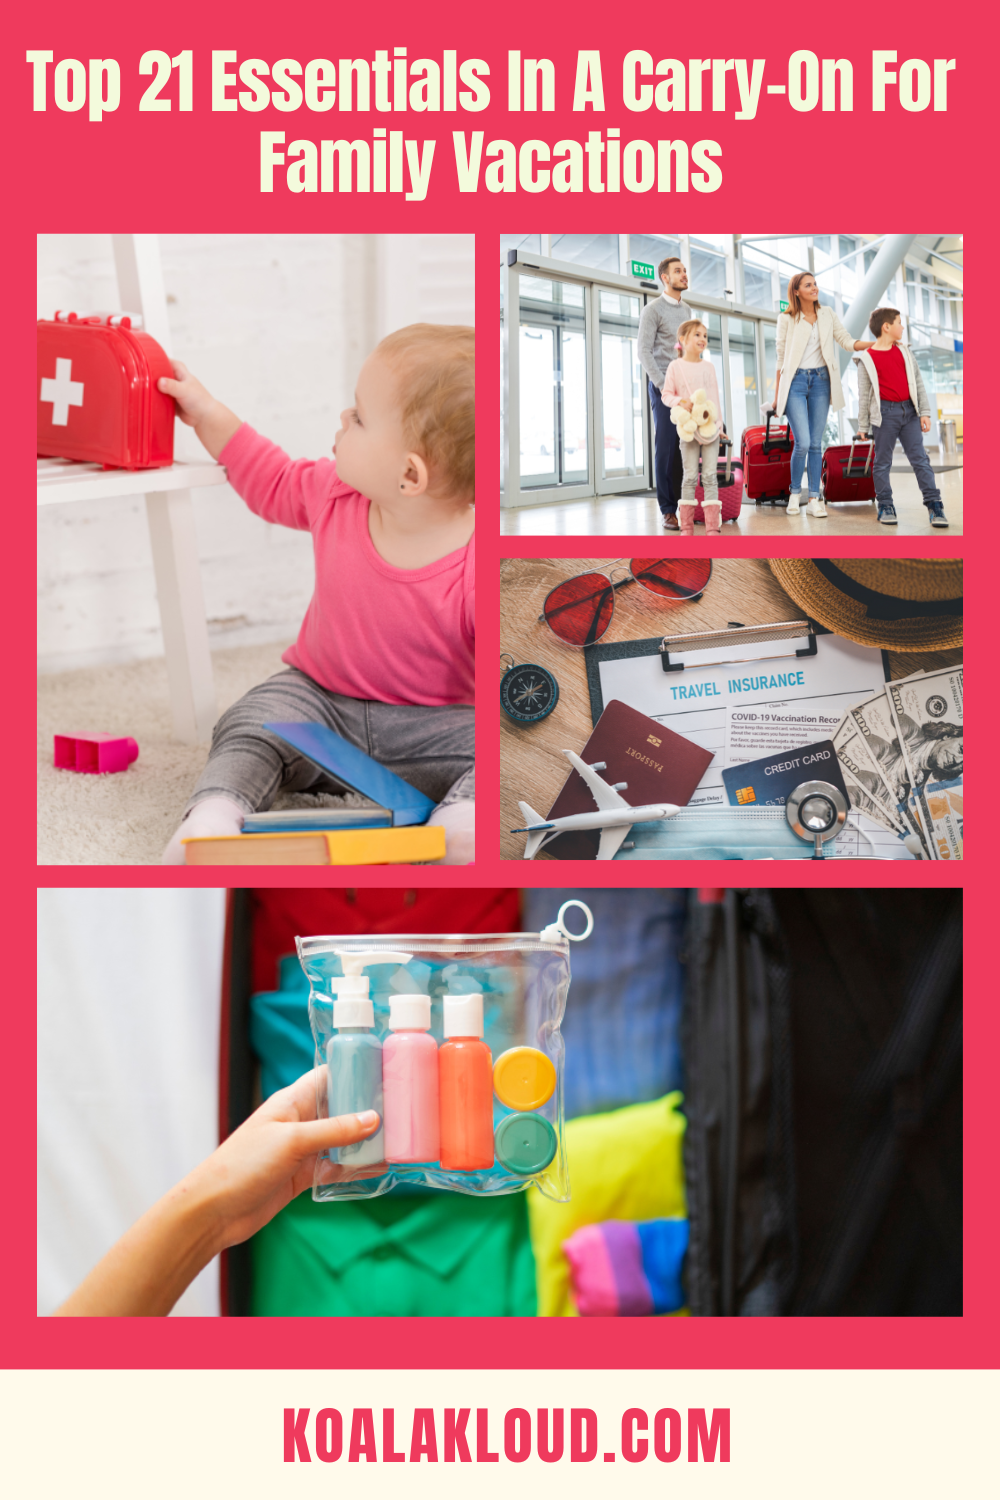 What To Pack In A Carry-On For Family Vacations: Top 21 Essentials